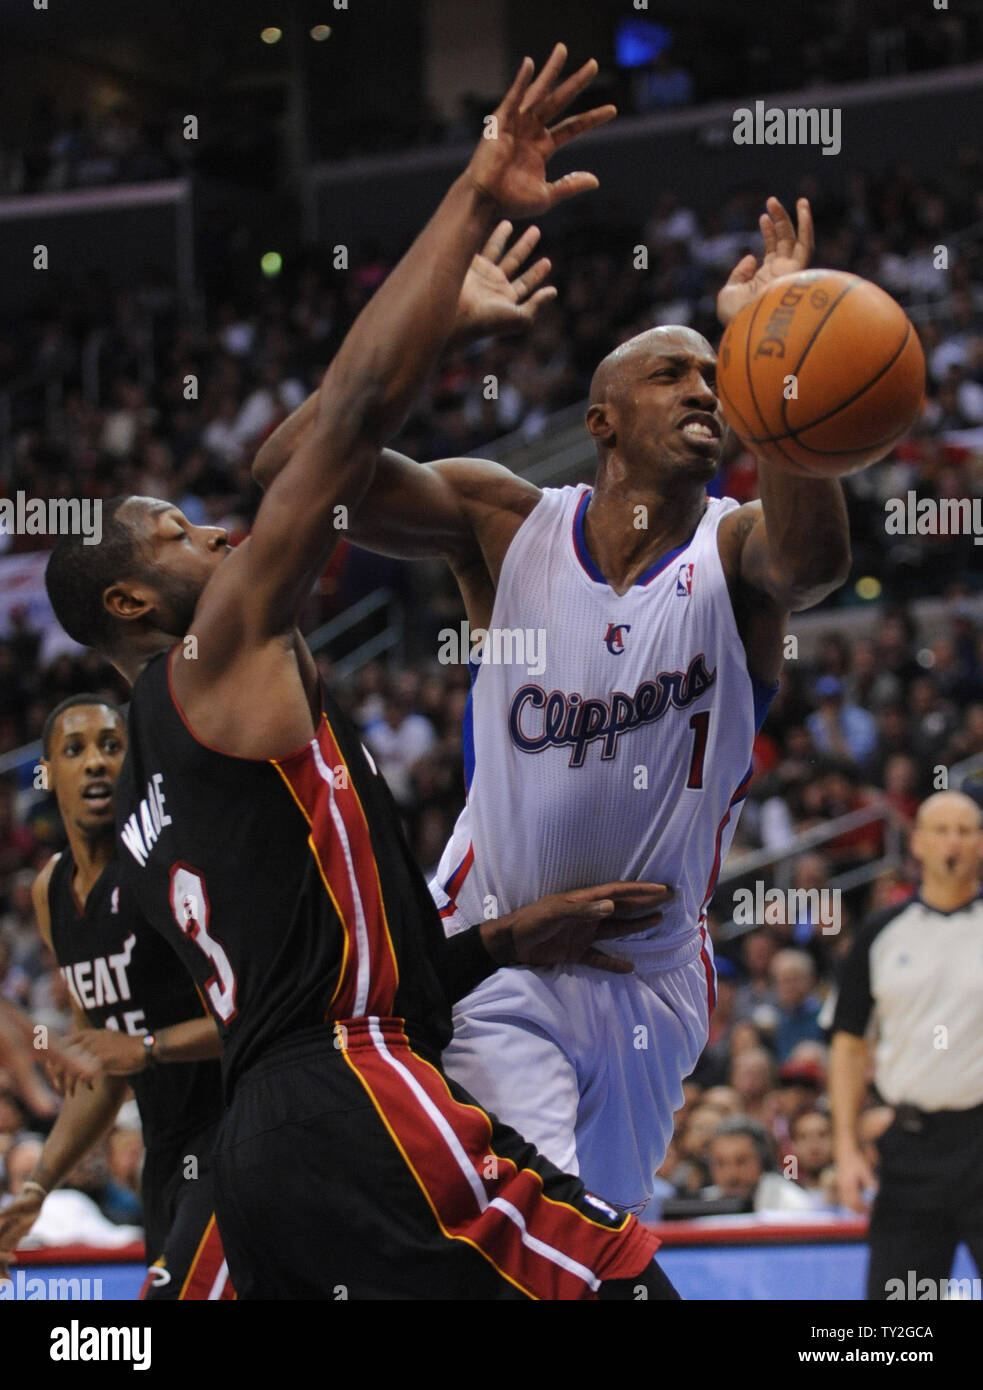 Los Angeles Clippers guard Chauncey Billups (1) is fouled by Miami Heat shooting guard Dwyane Wade (3) in the second half of  their NBA basketball game in Los Angeles on January 11, 2012.  The Clippers won 95-89.  UPI/Lori Shepler Stock Photo